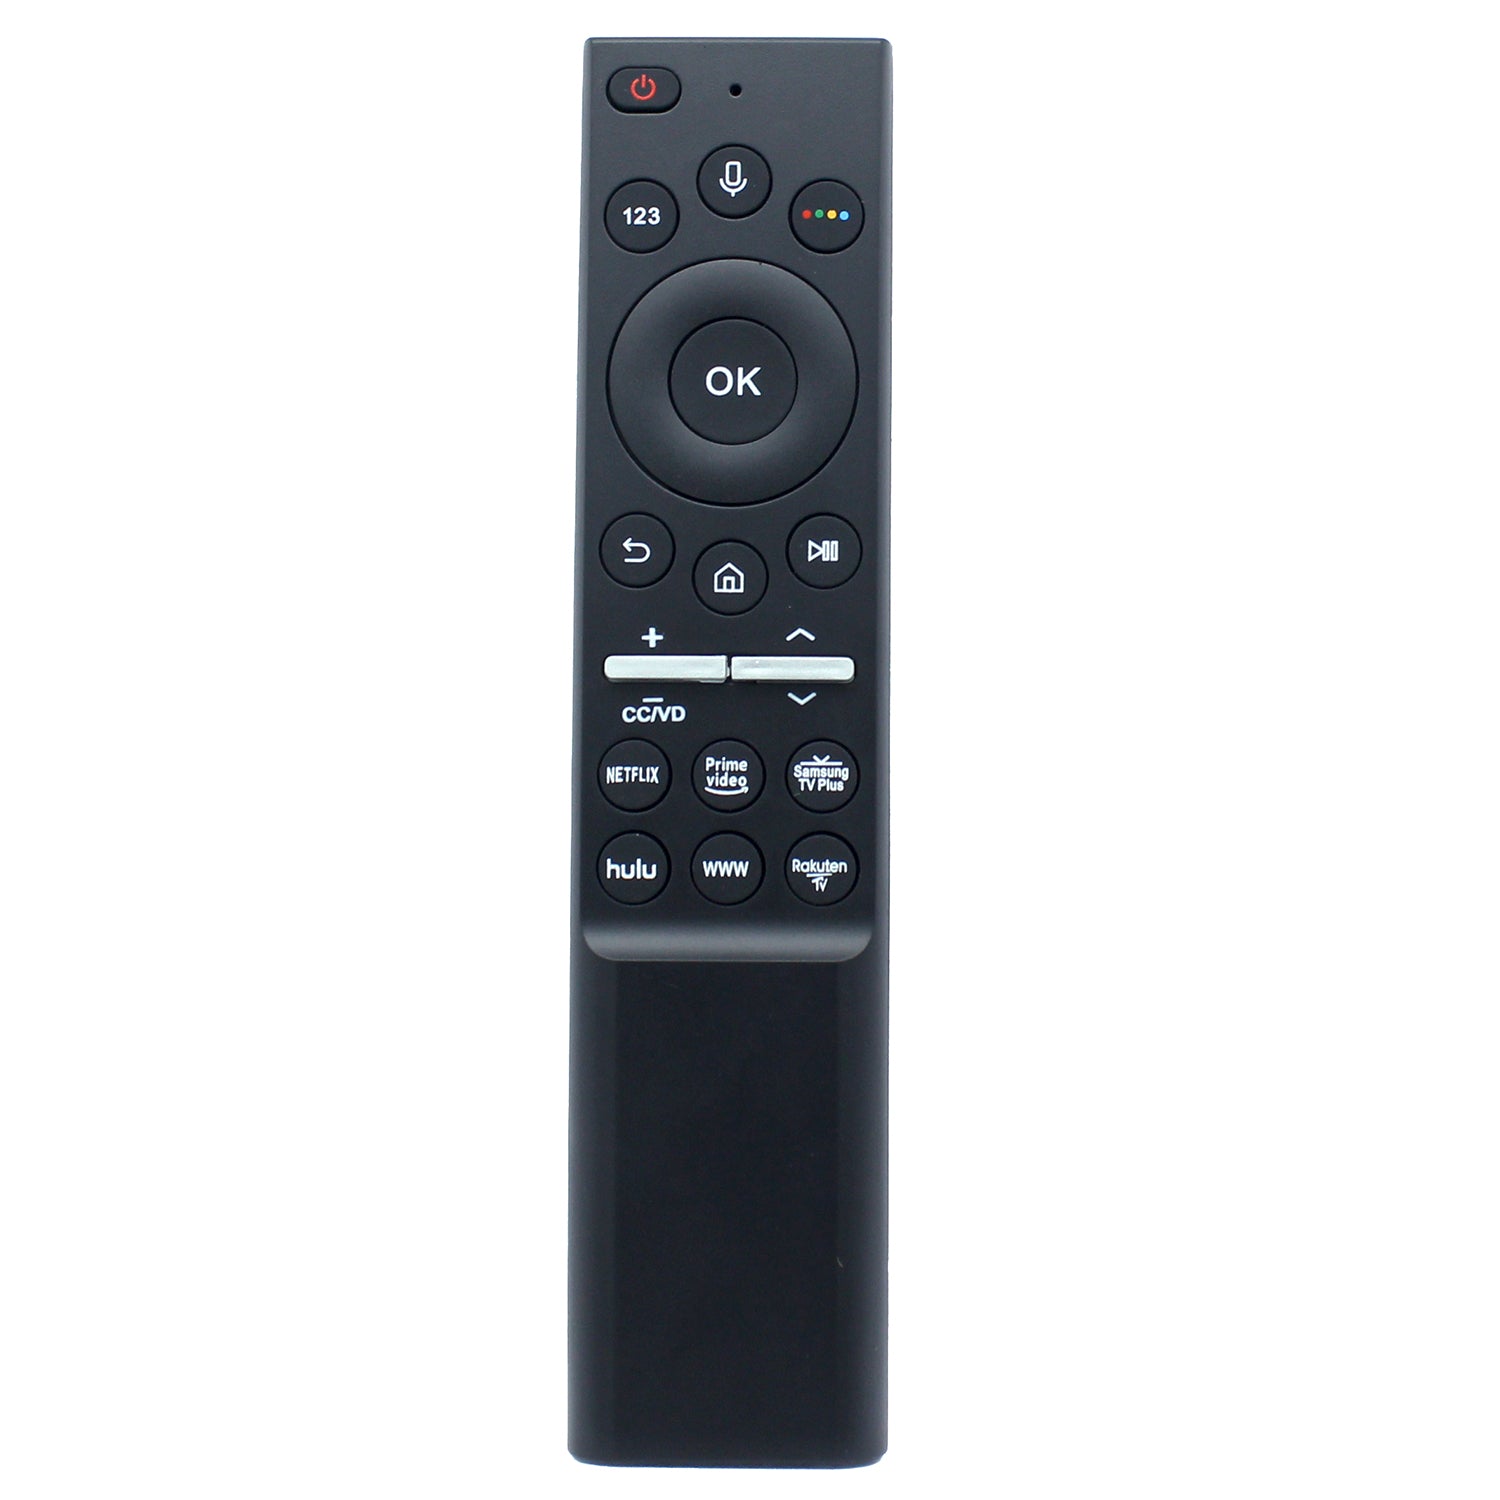 BN59-01270A Voice Remote Replacement for Samsung TV QA55Q7FAMW